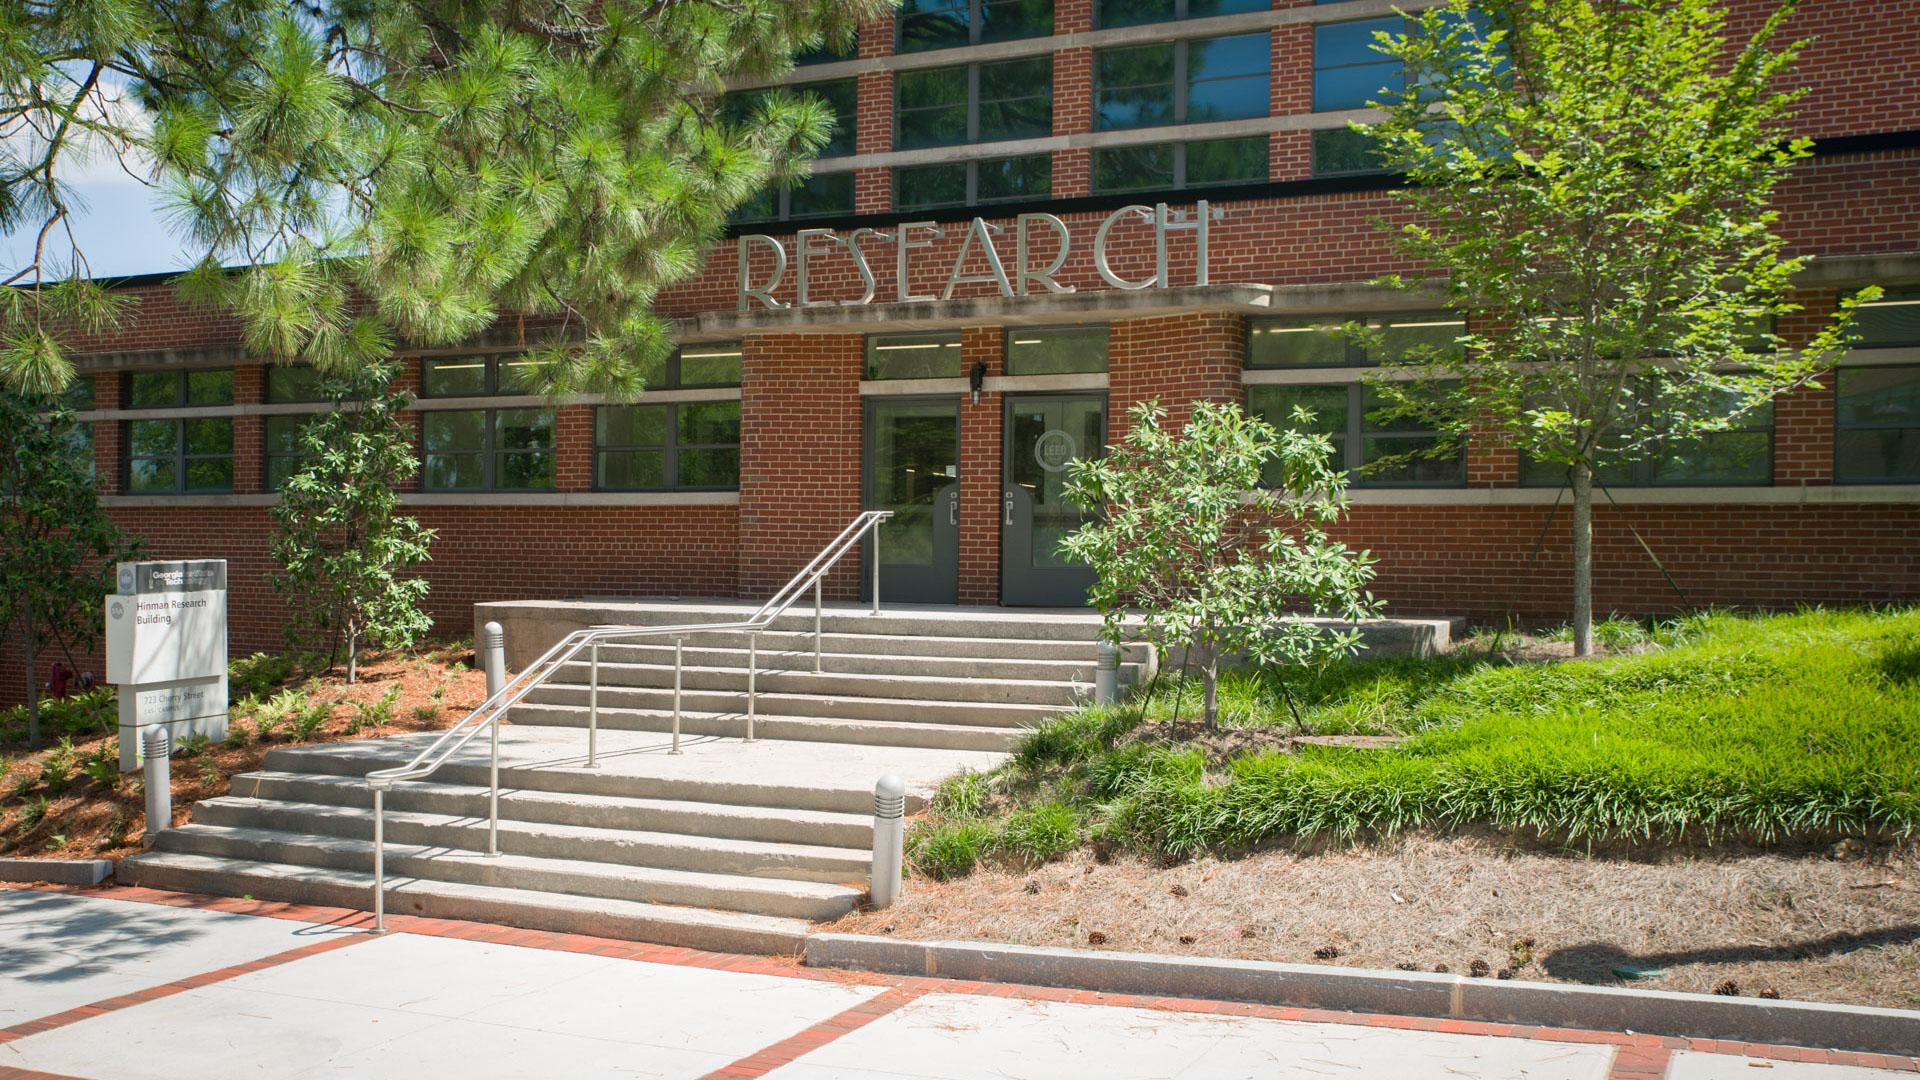 research building on campus